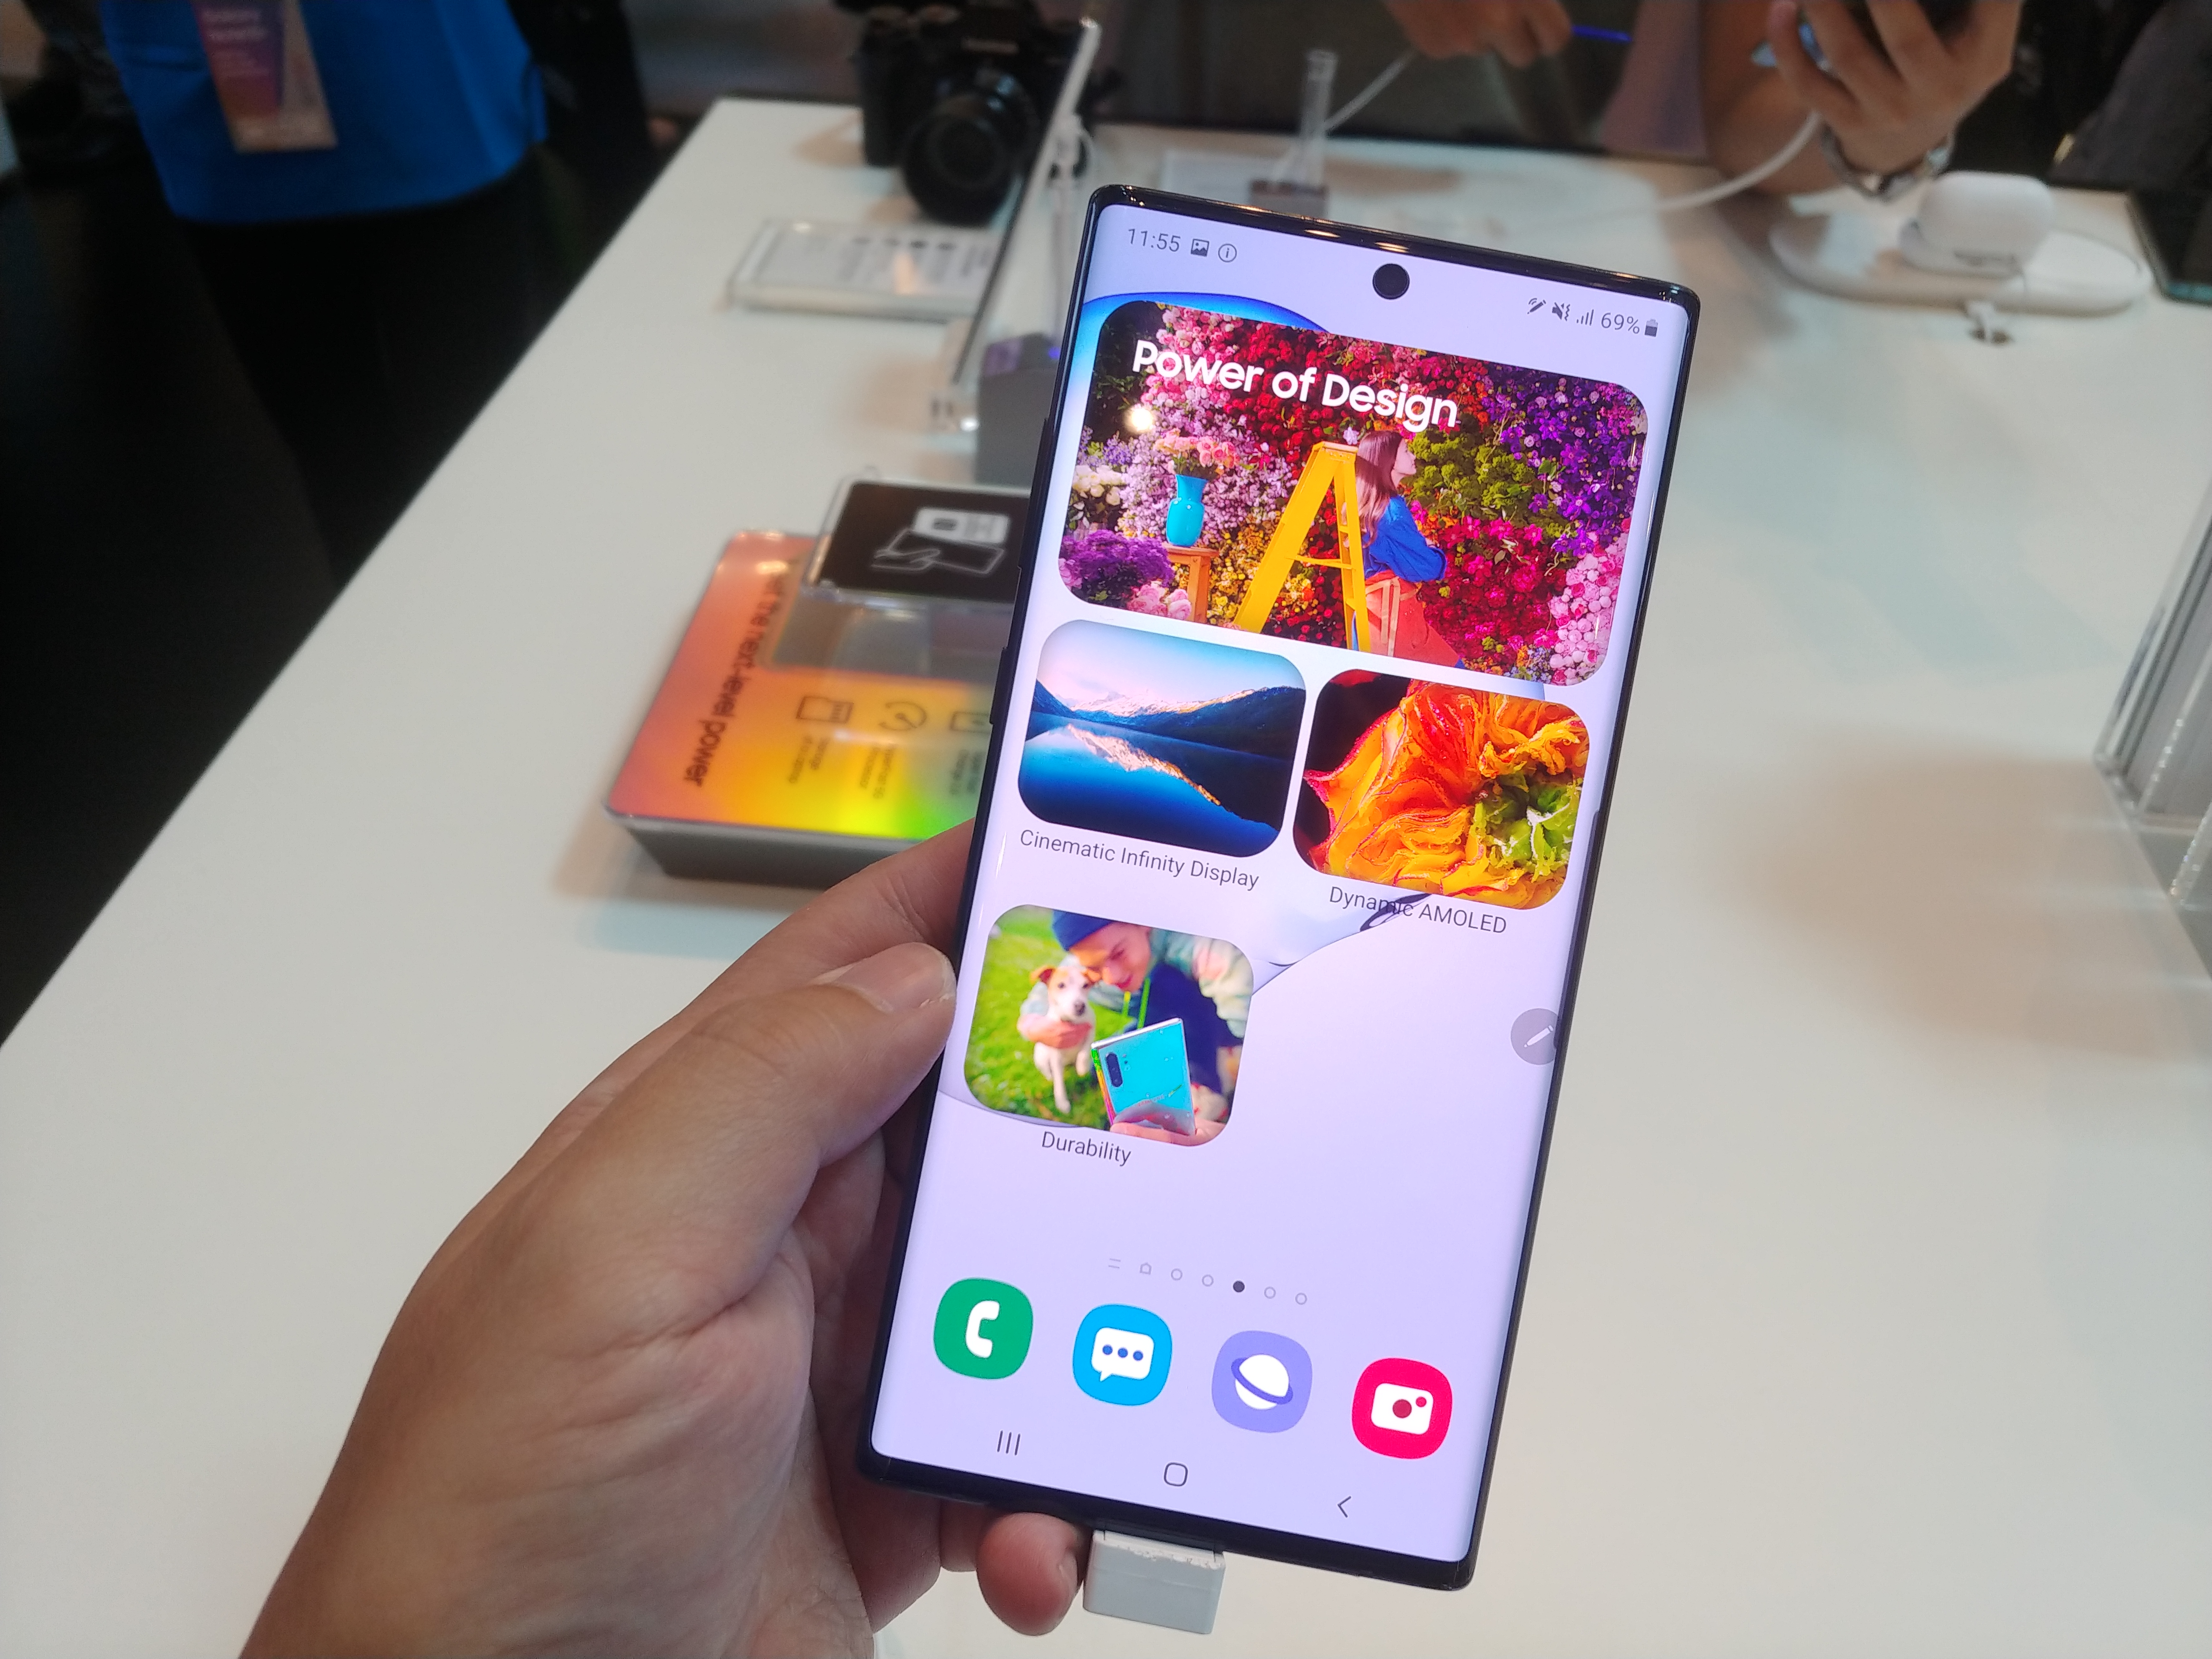 Hands On With the Samsung Galaxy Note 10 and Note 10+